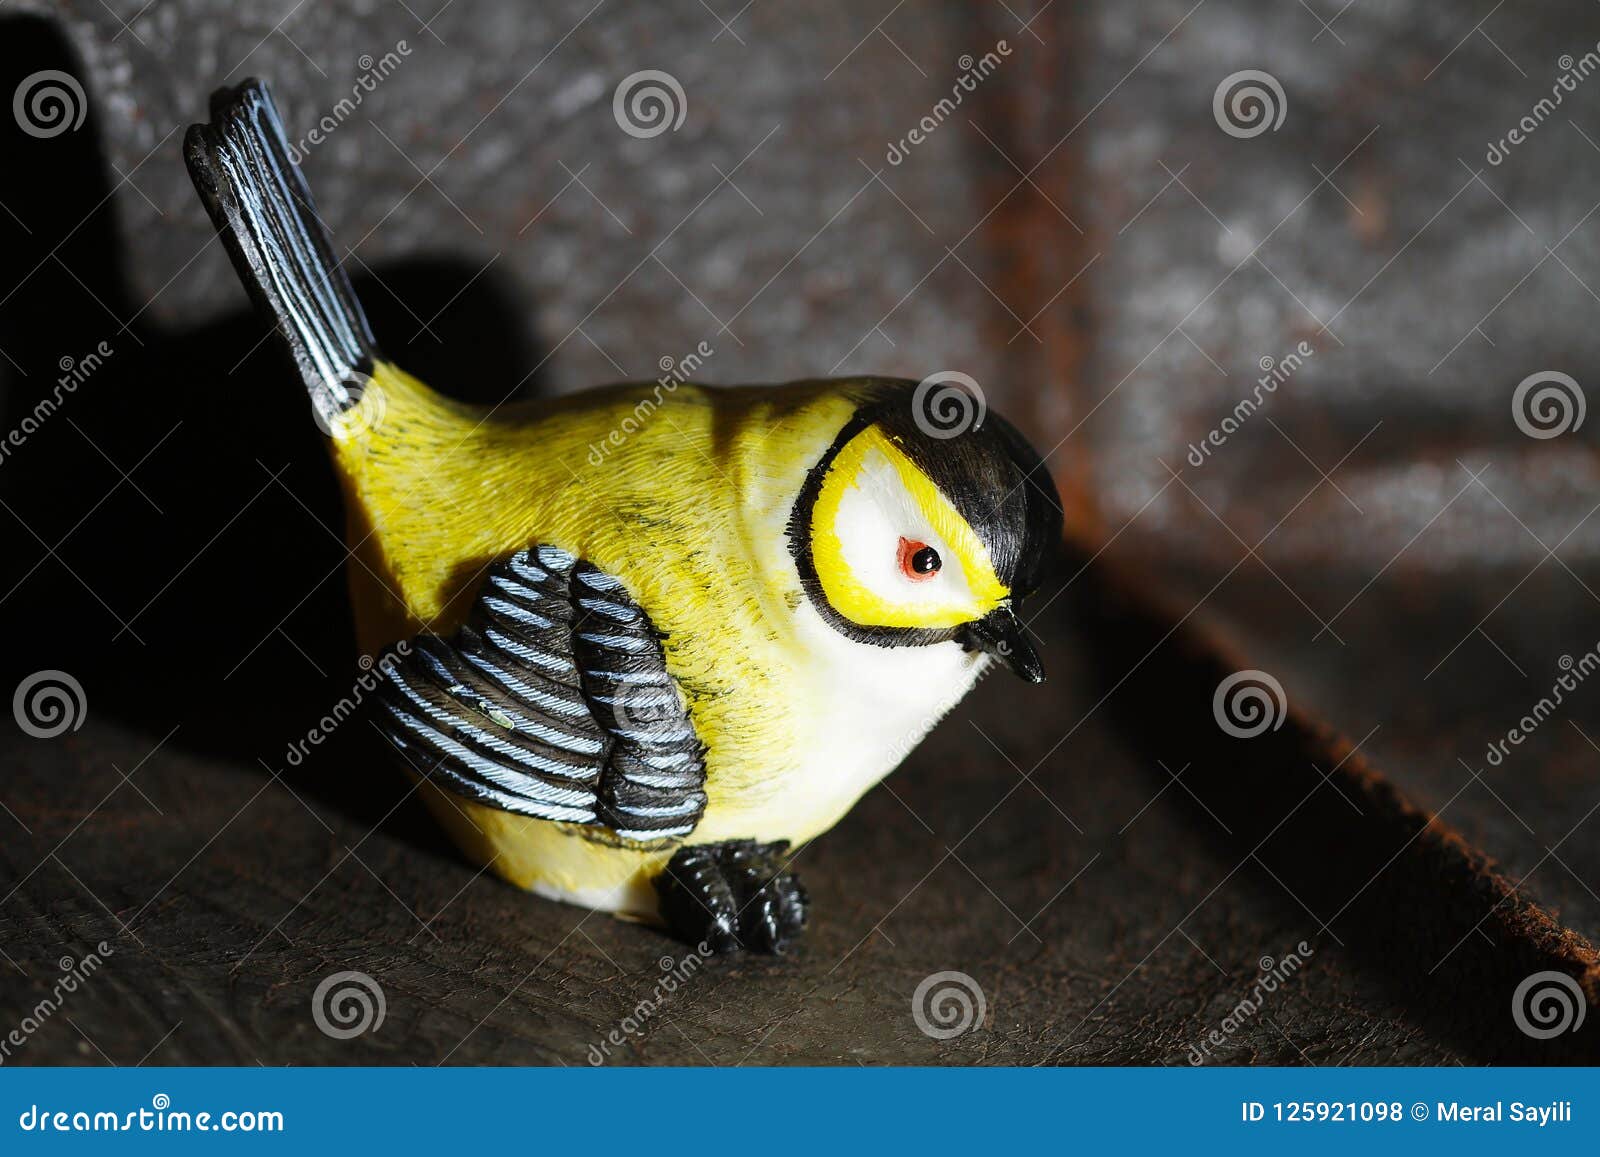 Canary Bird Made Of Bauble Stock Photo Image Of Especially - 